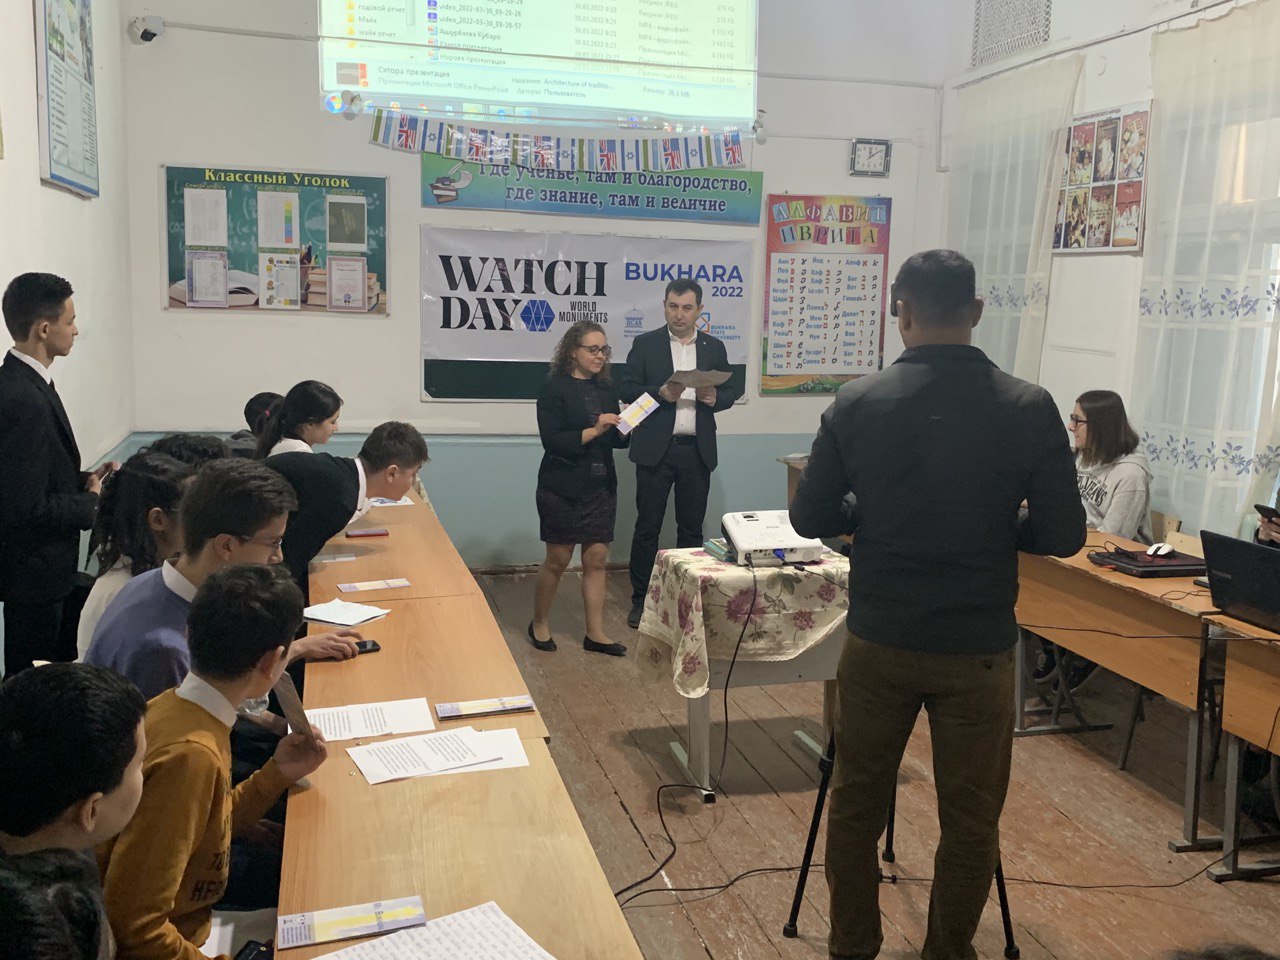 Watch Day Seminar in Bukhara. Lecture at a secondary school, 2022